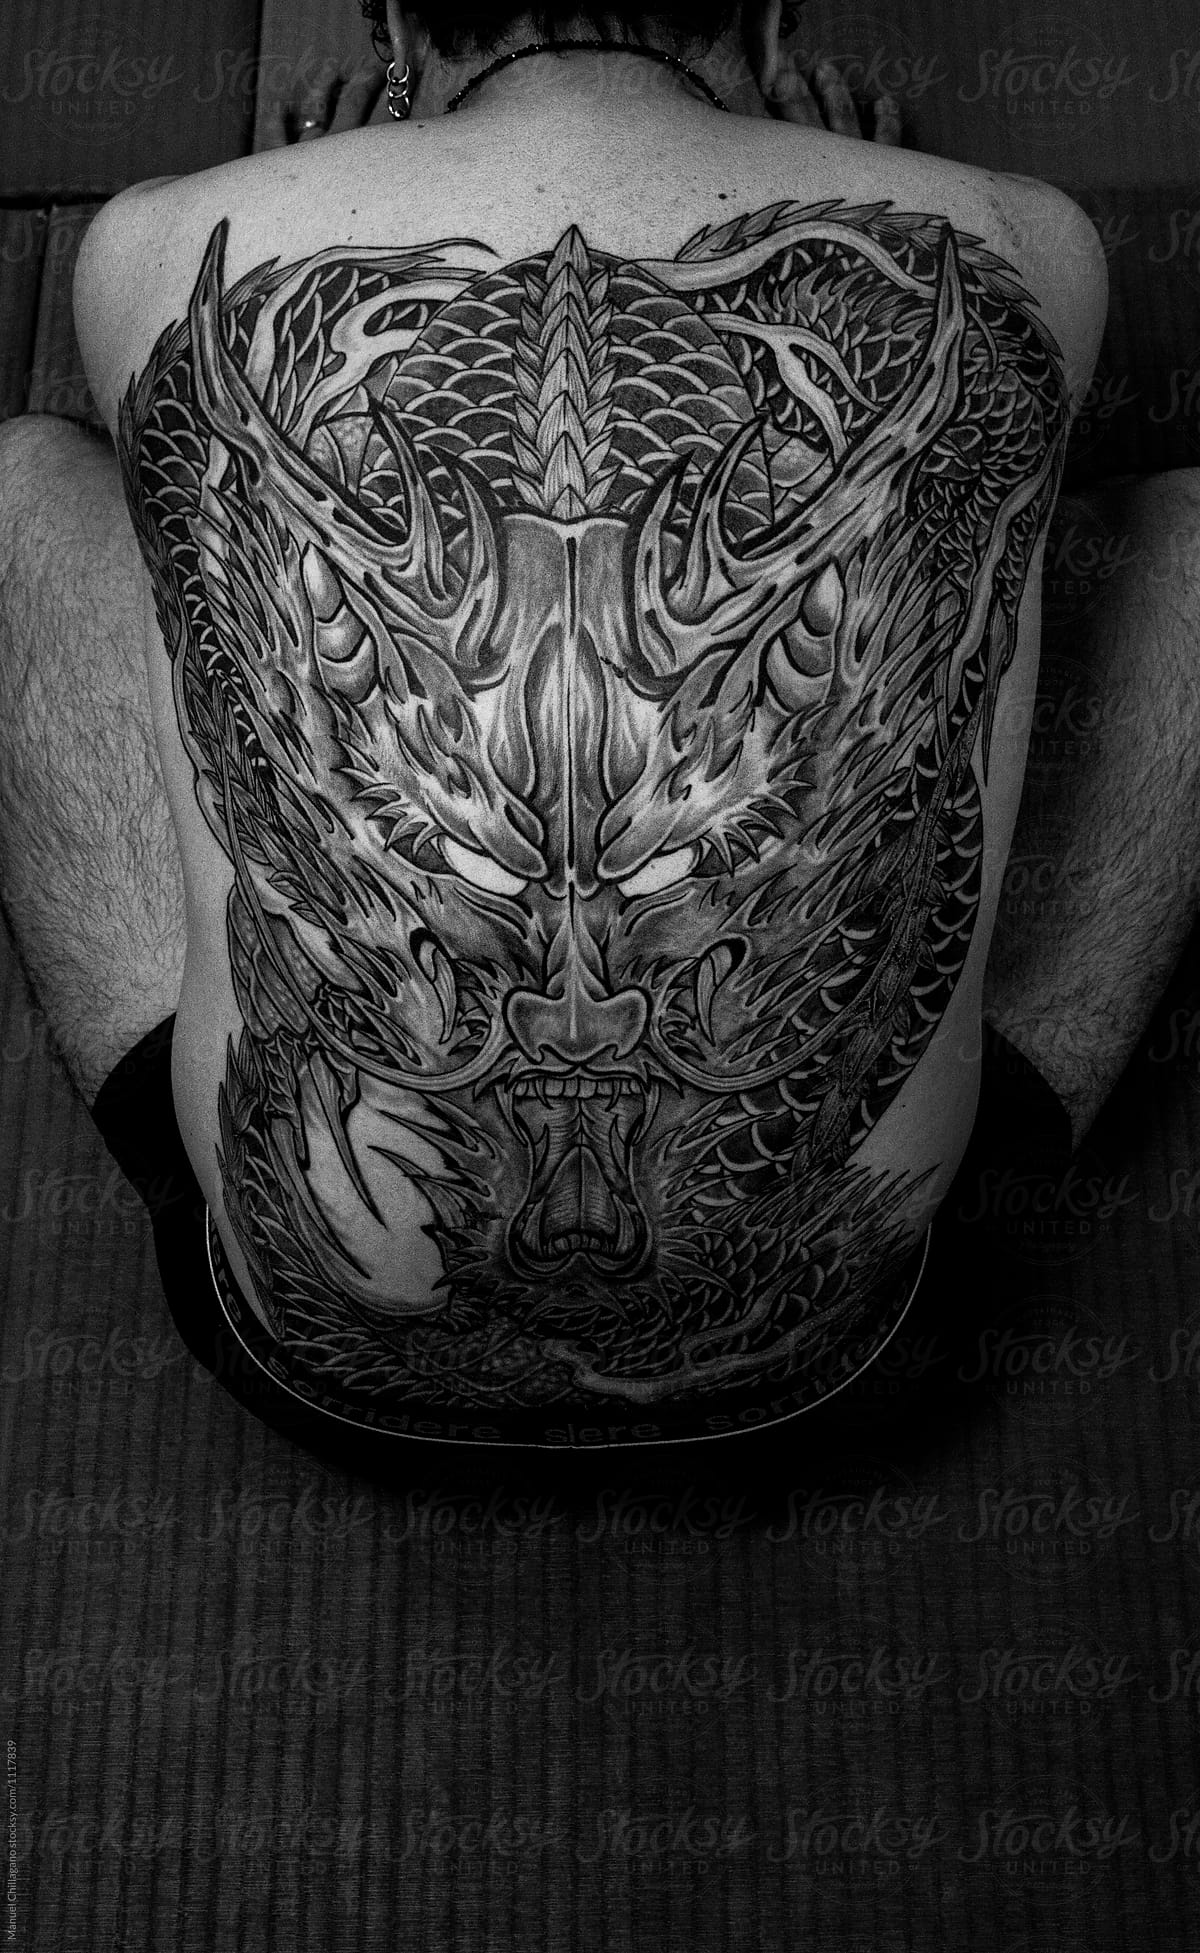 Japanese man with a Dragon tattooed on his back